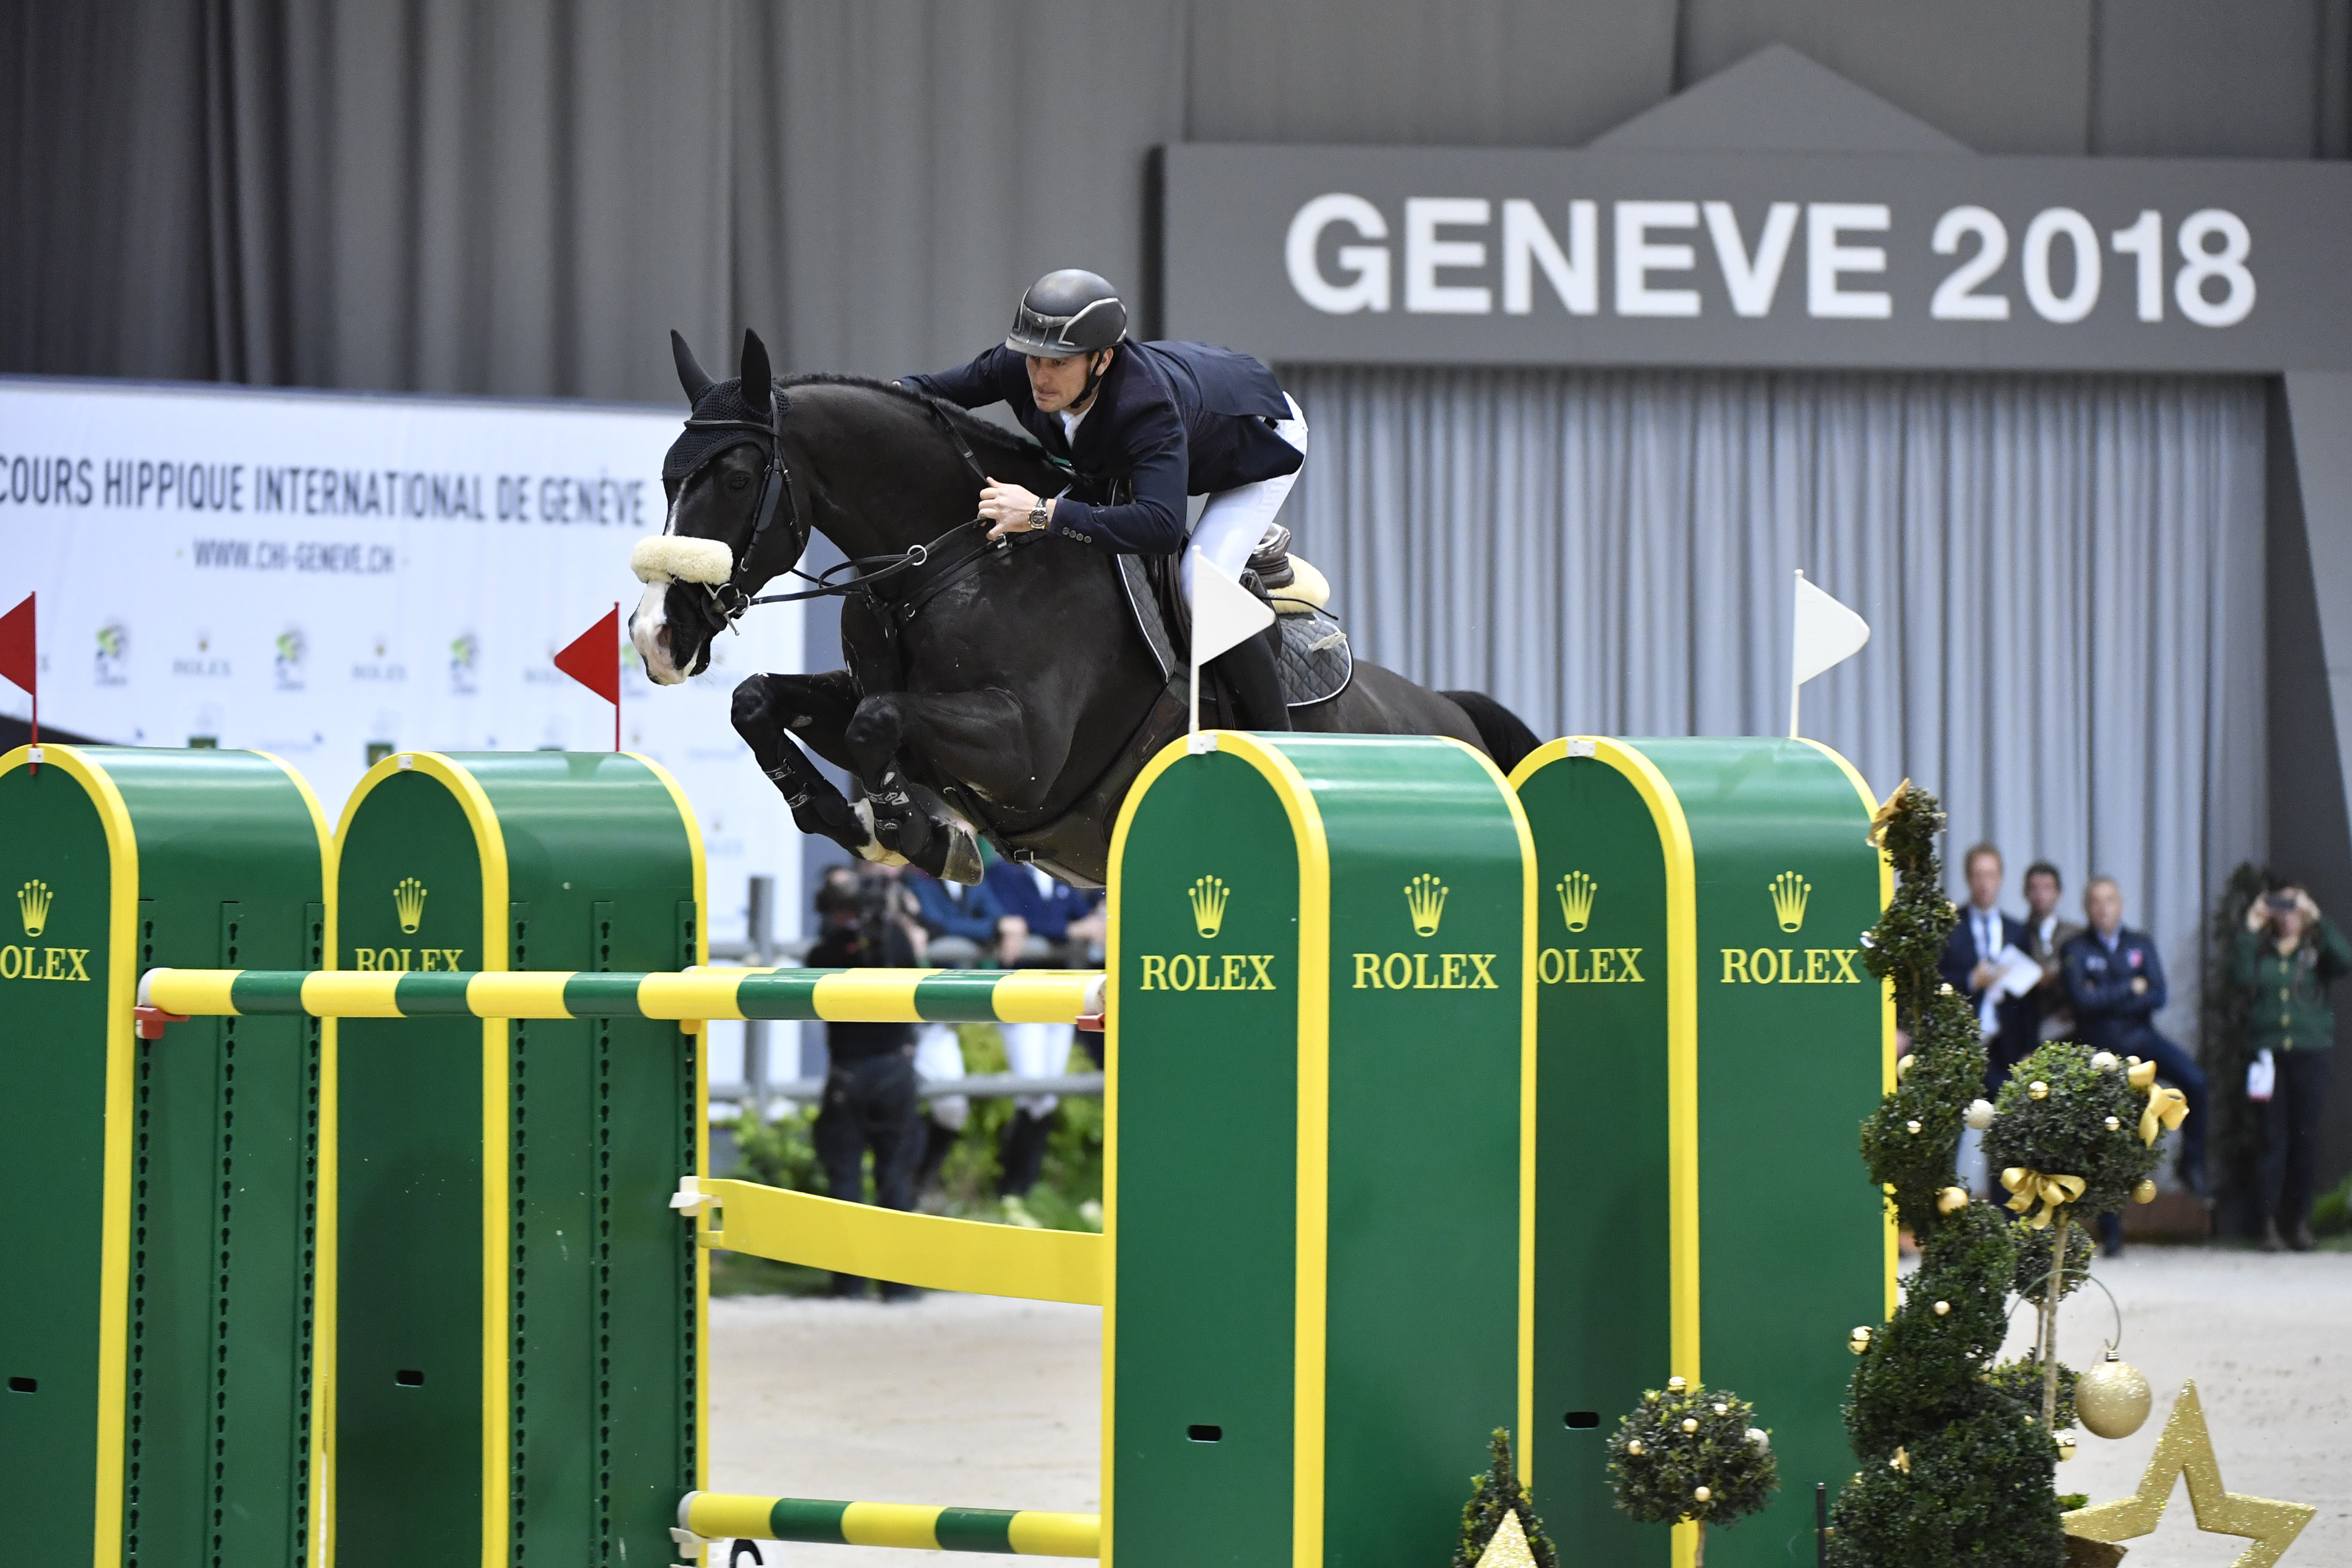 The world's best riders return to the CHI Geneva to contest the Rolex IJRC Top 10 Final and the Rolex Grand Prix